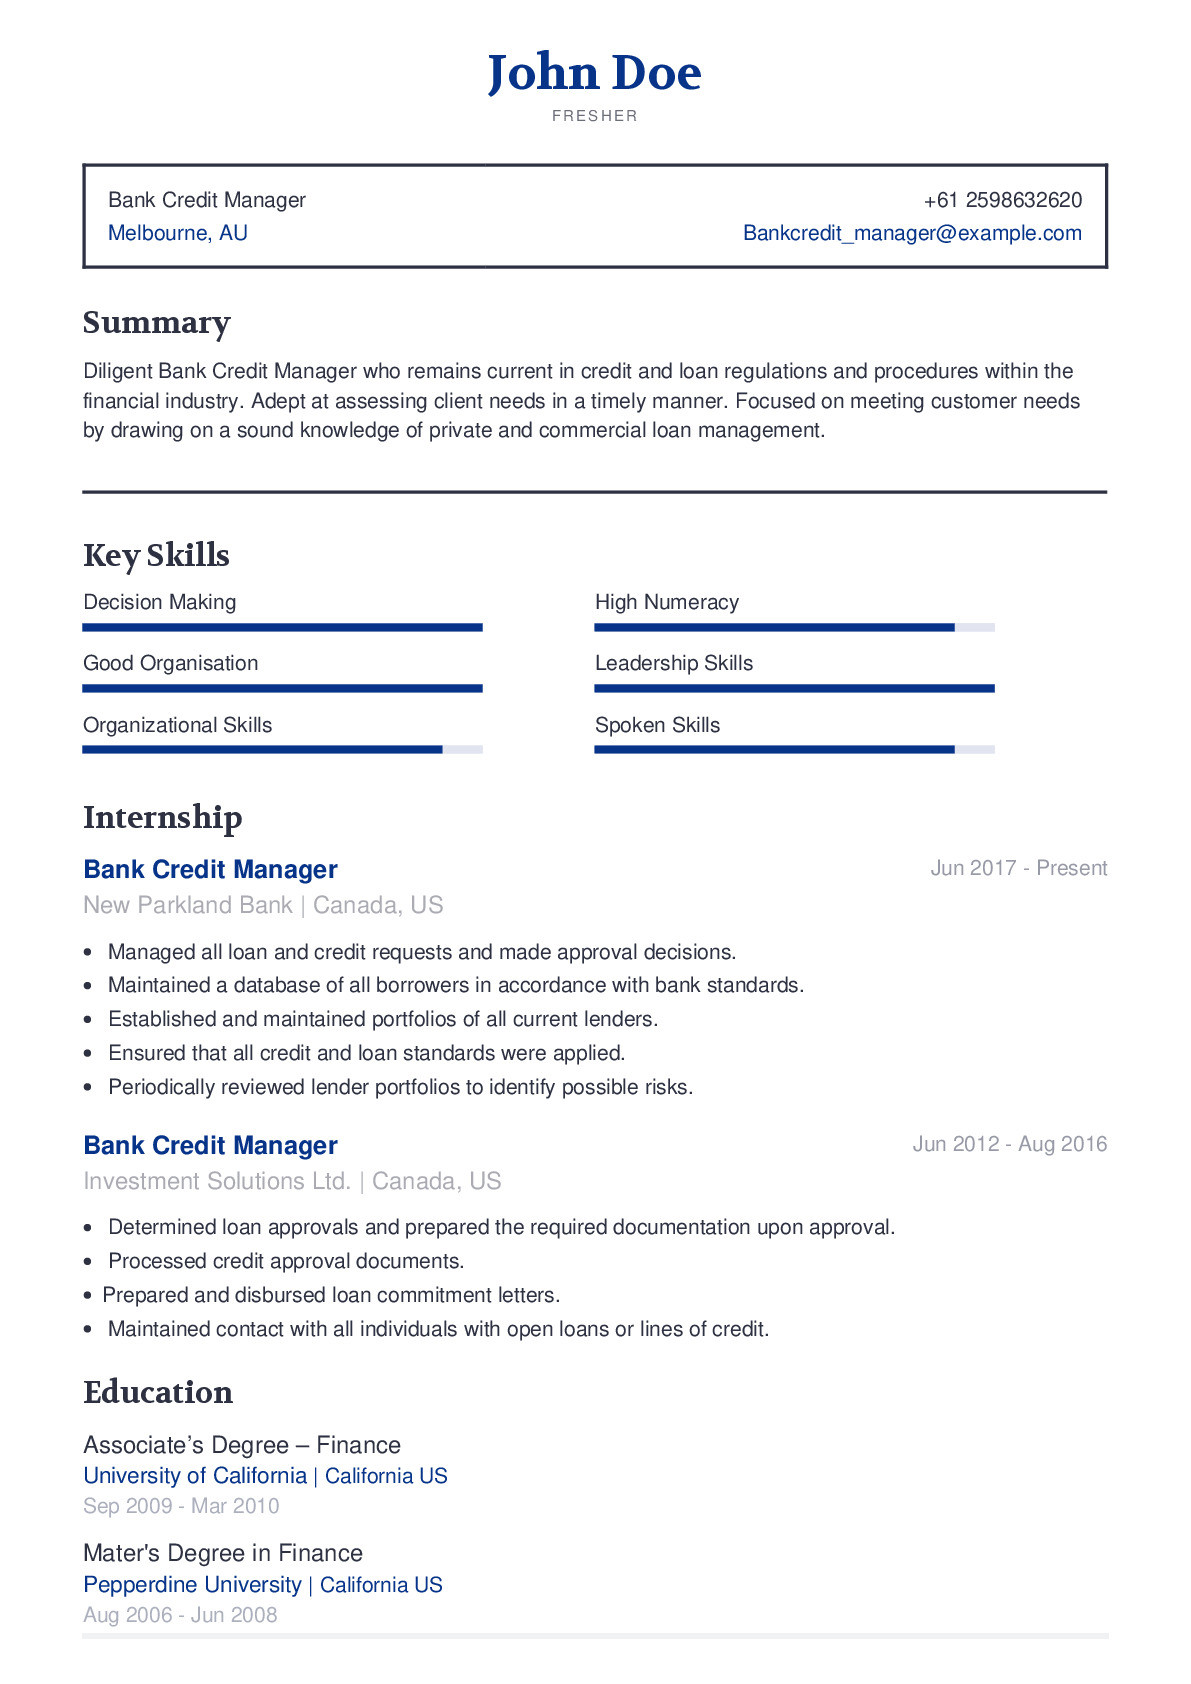 Resume Samples for Credit Manager India Bank Credit Manager Resume Example with Content Sample Craftmycv